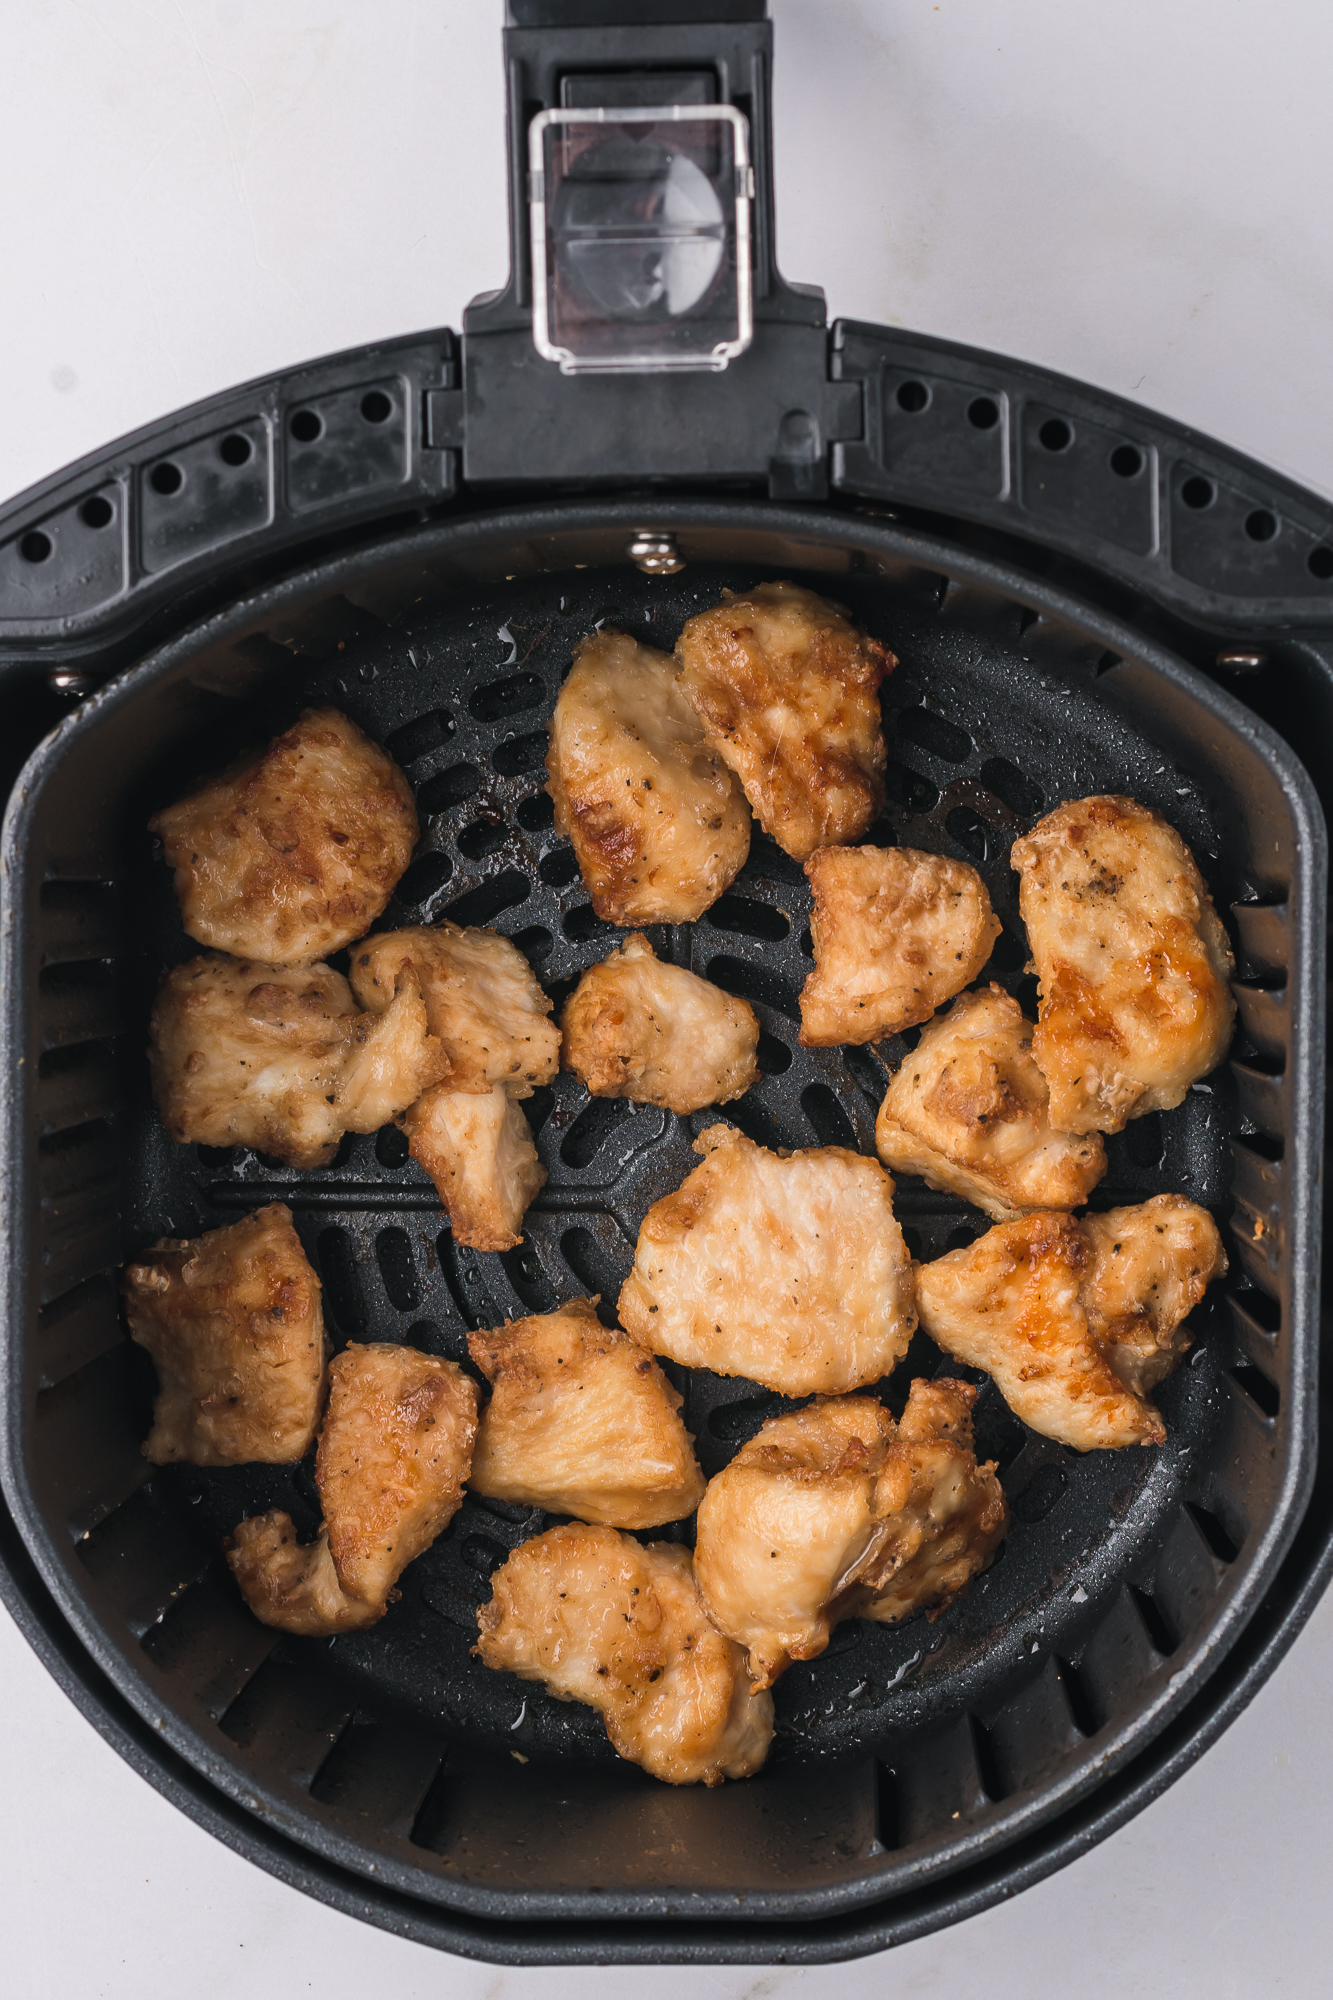 Pro Tips for Making Copycat Qdoba Chicken in Air Fryer:

Pound the Chicken: Before marinating, consider pounding the chicken breasts to an even thickness. This will help ensure that the chicken cooks uniformly and prevents any part from drying out during air frying.

Marinate Longer: For more intense flavors, marinate the chicken for an extended period. If possible, marinate the chicken for 4 to 8 hours or even overnight in the refrigerator. This allows the spices and seasonings to penetrate the chicken fully.

Adjust Seasonings: Feel free to adjust the seasonings to match your taste preferences. If you prefer a spicier chicken, add more chili powder or cayenne pepper. For a milder version, reduce the amount of spice.

Use a Meat Thermometer: To ensure perfectly cooked chicken, use a meat thermometer to check the internal temperature. The chicken is safe to eat when it reaches 165°F (74°C).

Resting Time Matters: Let the air-fried chicken rest for a few minutes after cooking. This resting period allows the juices to redistribute within the chicken, resulting in a more succulent and flavorful dish.

Reheat Carefully: If you have leftovers, reheat the chicken in the air fryer for a short period at a lower temperature to prevent overcooking. About 2-3 minutes at 350°F (175°C) should be sufficient to warm the chicken without drying it out.

Serve with Qdoba-Style Fixings: Enhance the Qdoba experience by serving the chicken with your favorite Qdoba-style fixings, such as rice, beans, salsa, guacamole, cheese, and sour cream. Create your own burritos, bowls, or salads for a complete and delicious meal.

Experiment with Cooking Times: Cooking times may vary depending on the thickness of the chicken breasts and the brand of the air fryer. Start with the recommended time and adjust accordingly for your specific air fryer model.

Double the Recipe: If you have a larger air fryer or need to serve a crowd, double the recipe to make more servings. Just ensure not to overcrowd the air fryer basket to maintain even cooking.

Grill for a Charred Flavor: For an even closer match to Qdoba's grilled chicken, consider finishing the air-fried chicken on an outdoor grill for a few minutes. The grill marks will add a lovely charred flavor to the chicken.

By following these pro tips, you can replicate the delicious and flavorful Qdoba chicken in your air fryer, creating a delightful meal that everyone will enjoy!